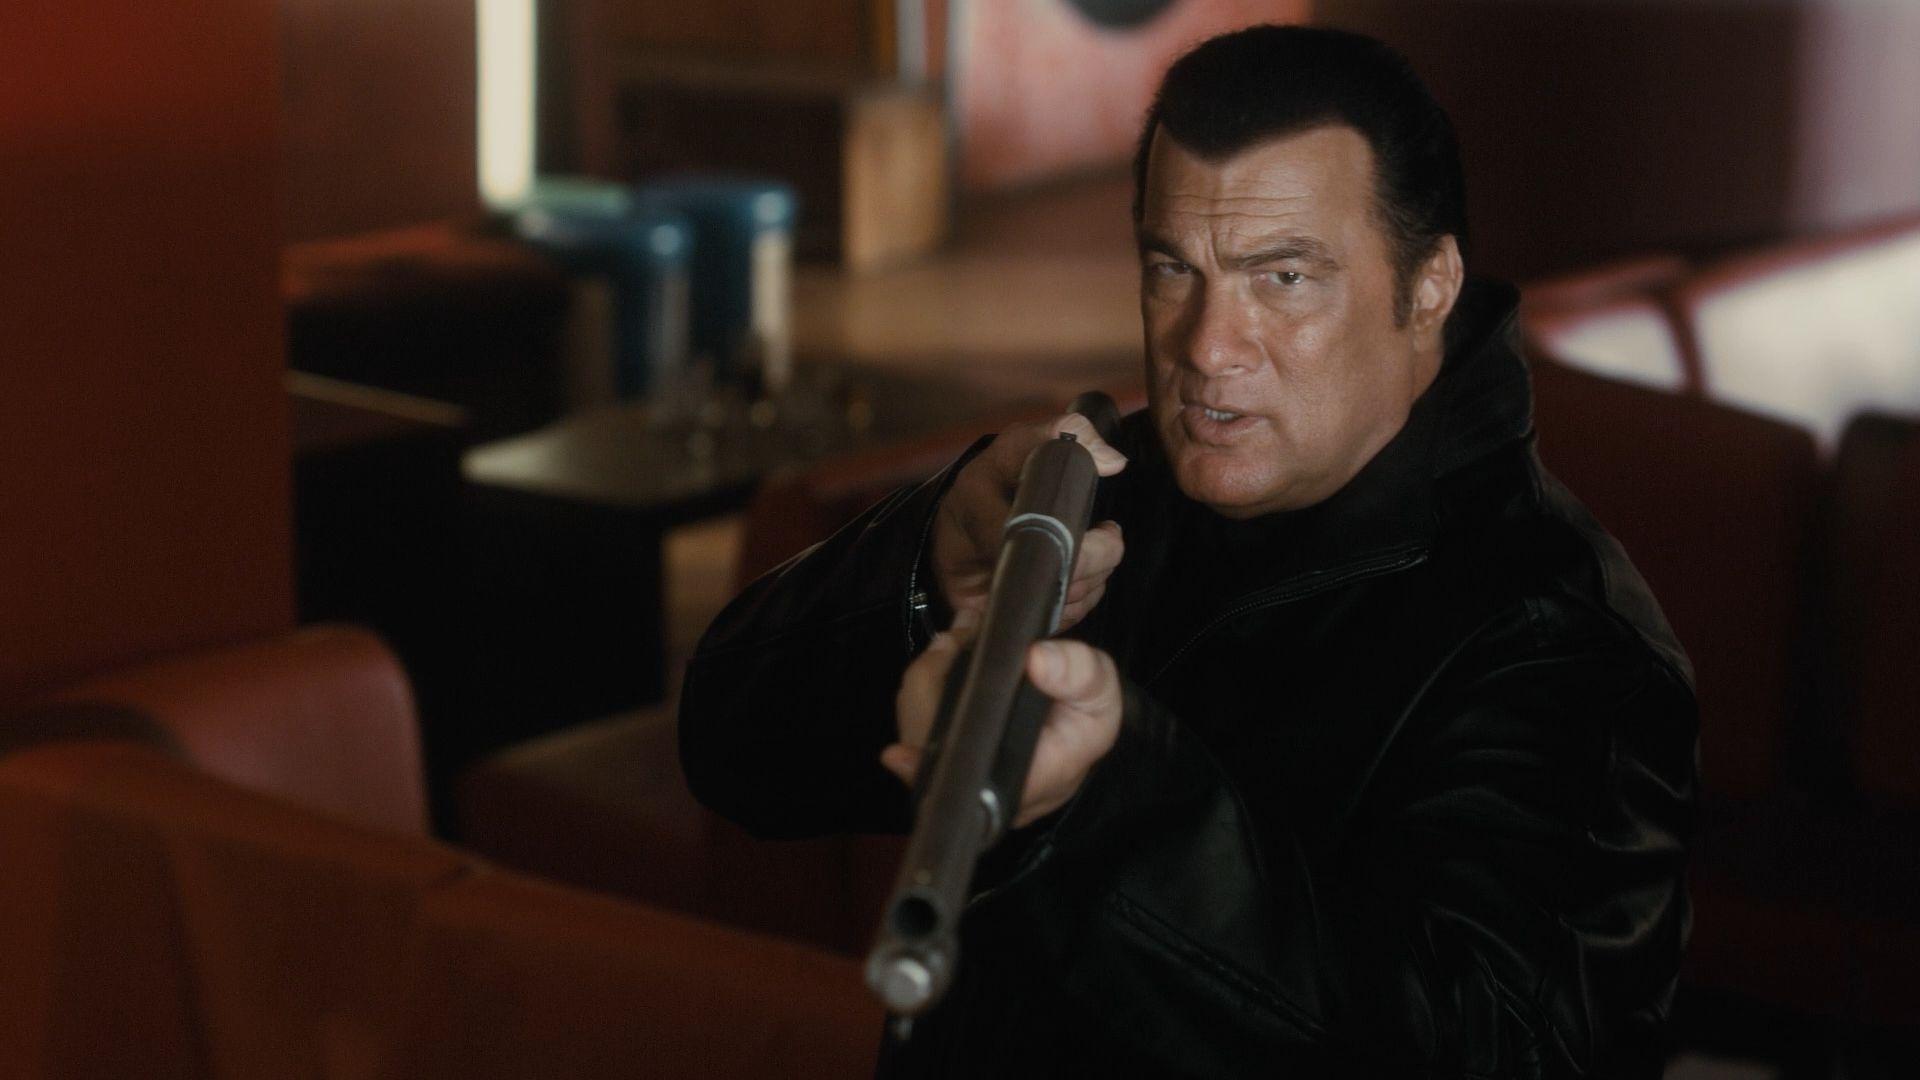 Steven Seagal Pic Of The Day. 